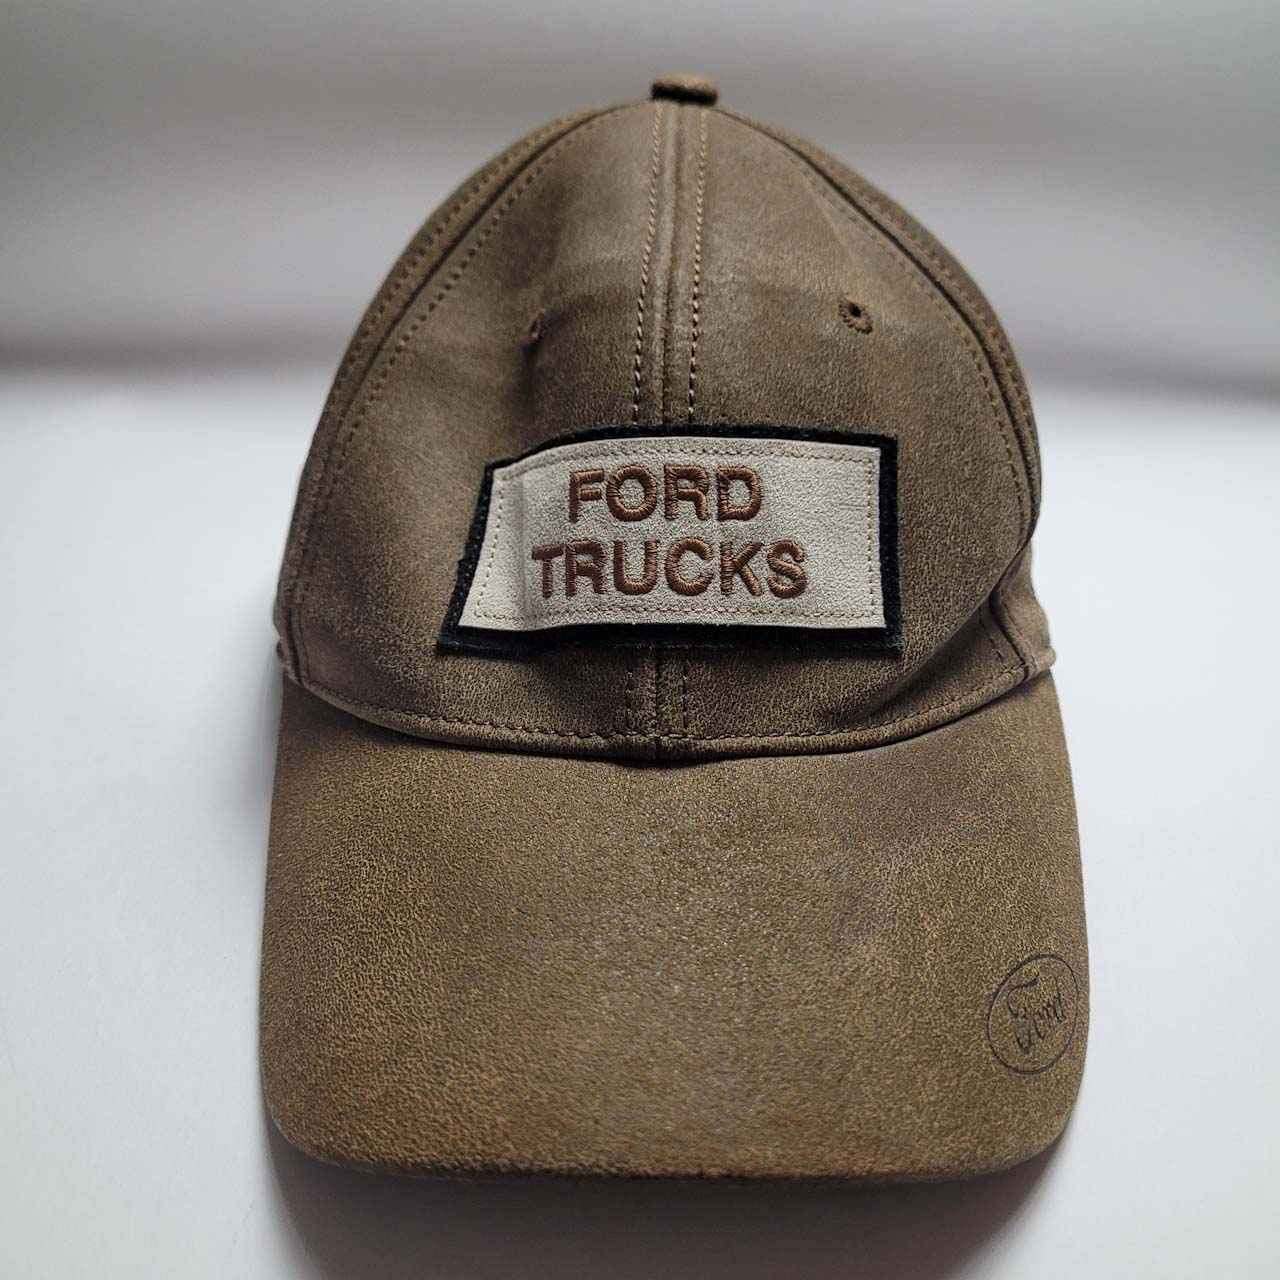 Ford Motor Company Leather Cap - Ford Trucks - Brown - Adjustable - RARE  FIND! - Treasure Website